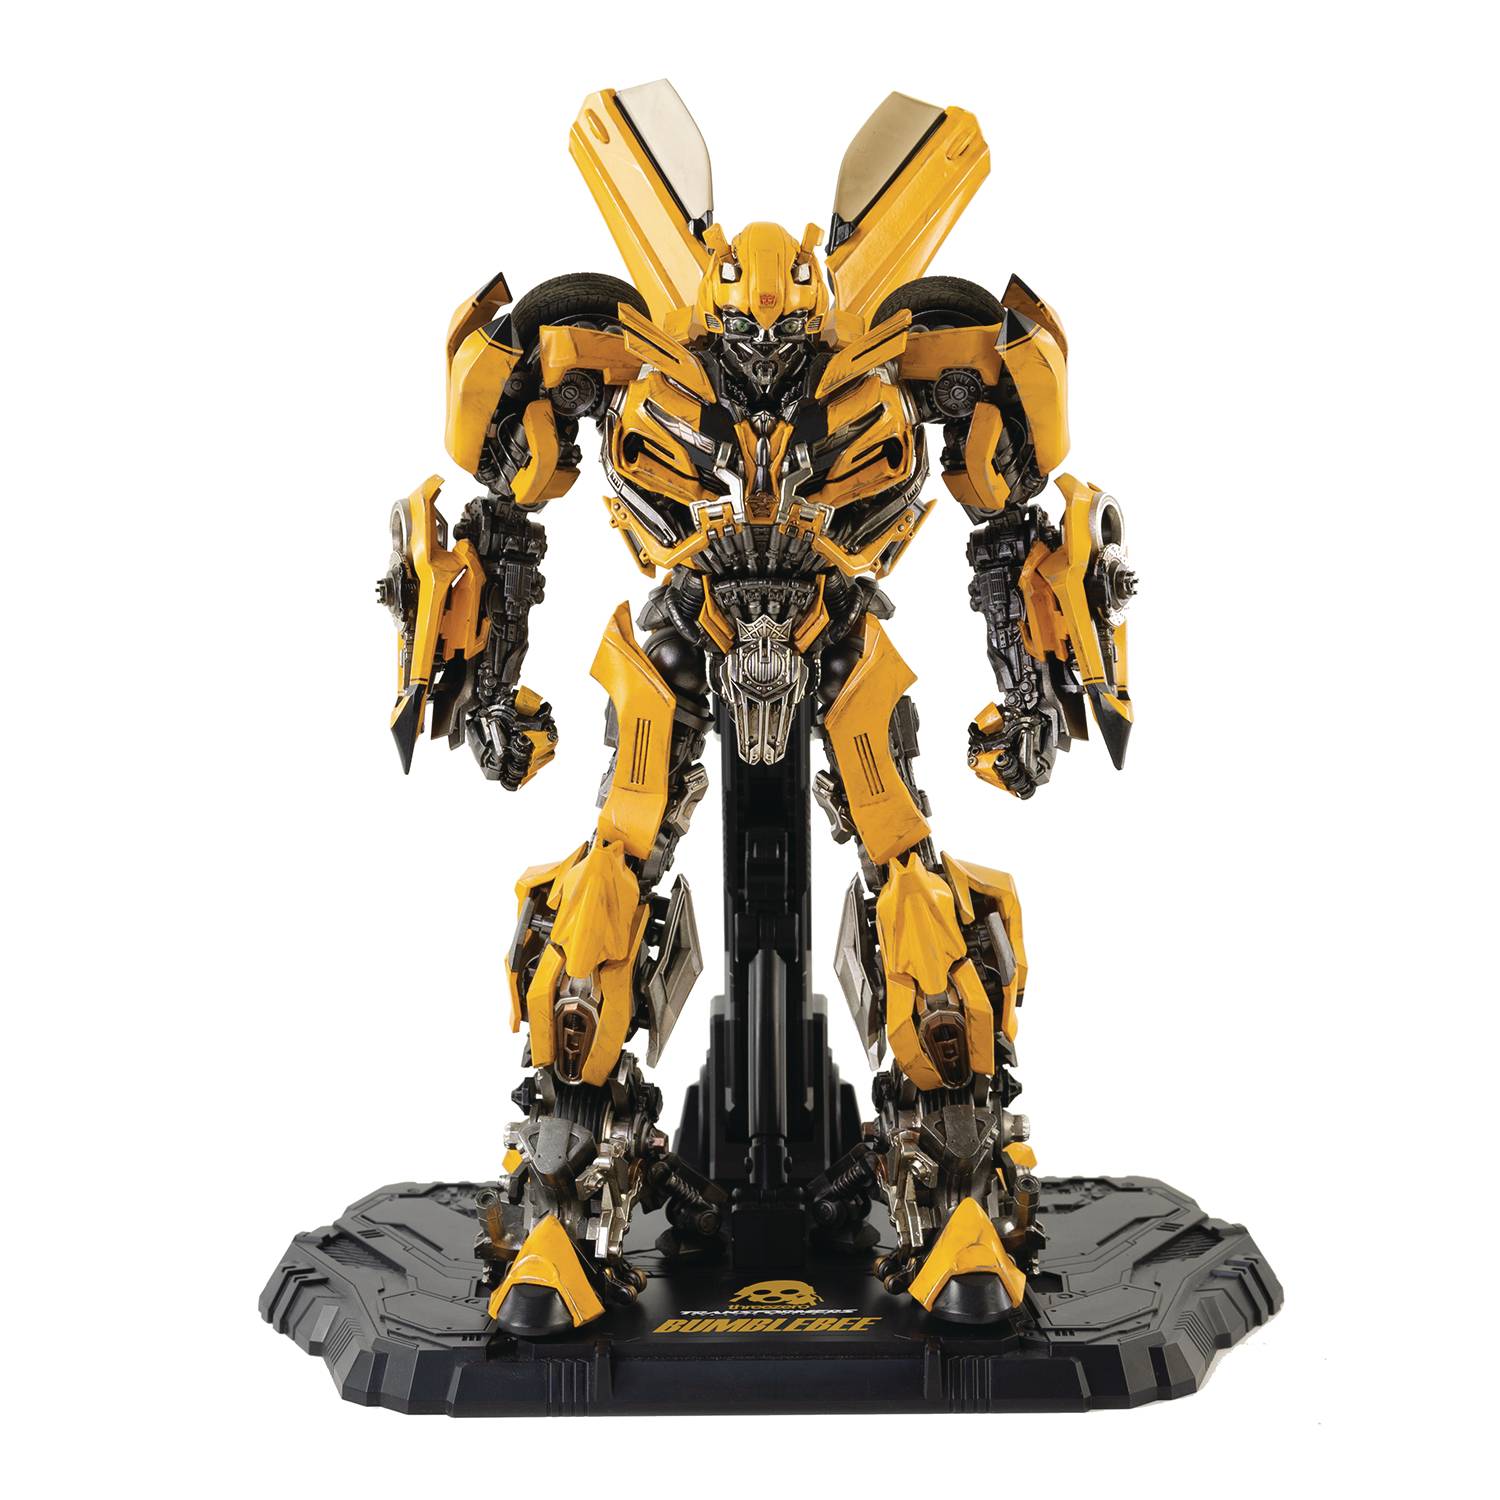 TRANSFORMERS LAST KNIGHT BUMBLEBEE DLX SCALE FIG